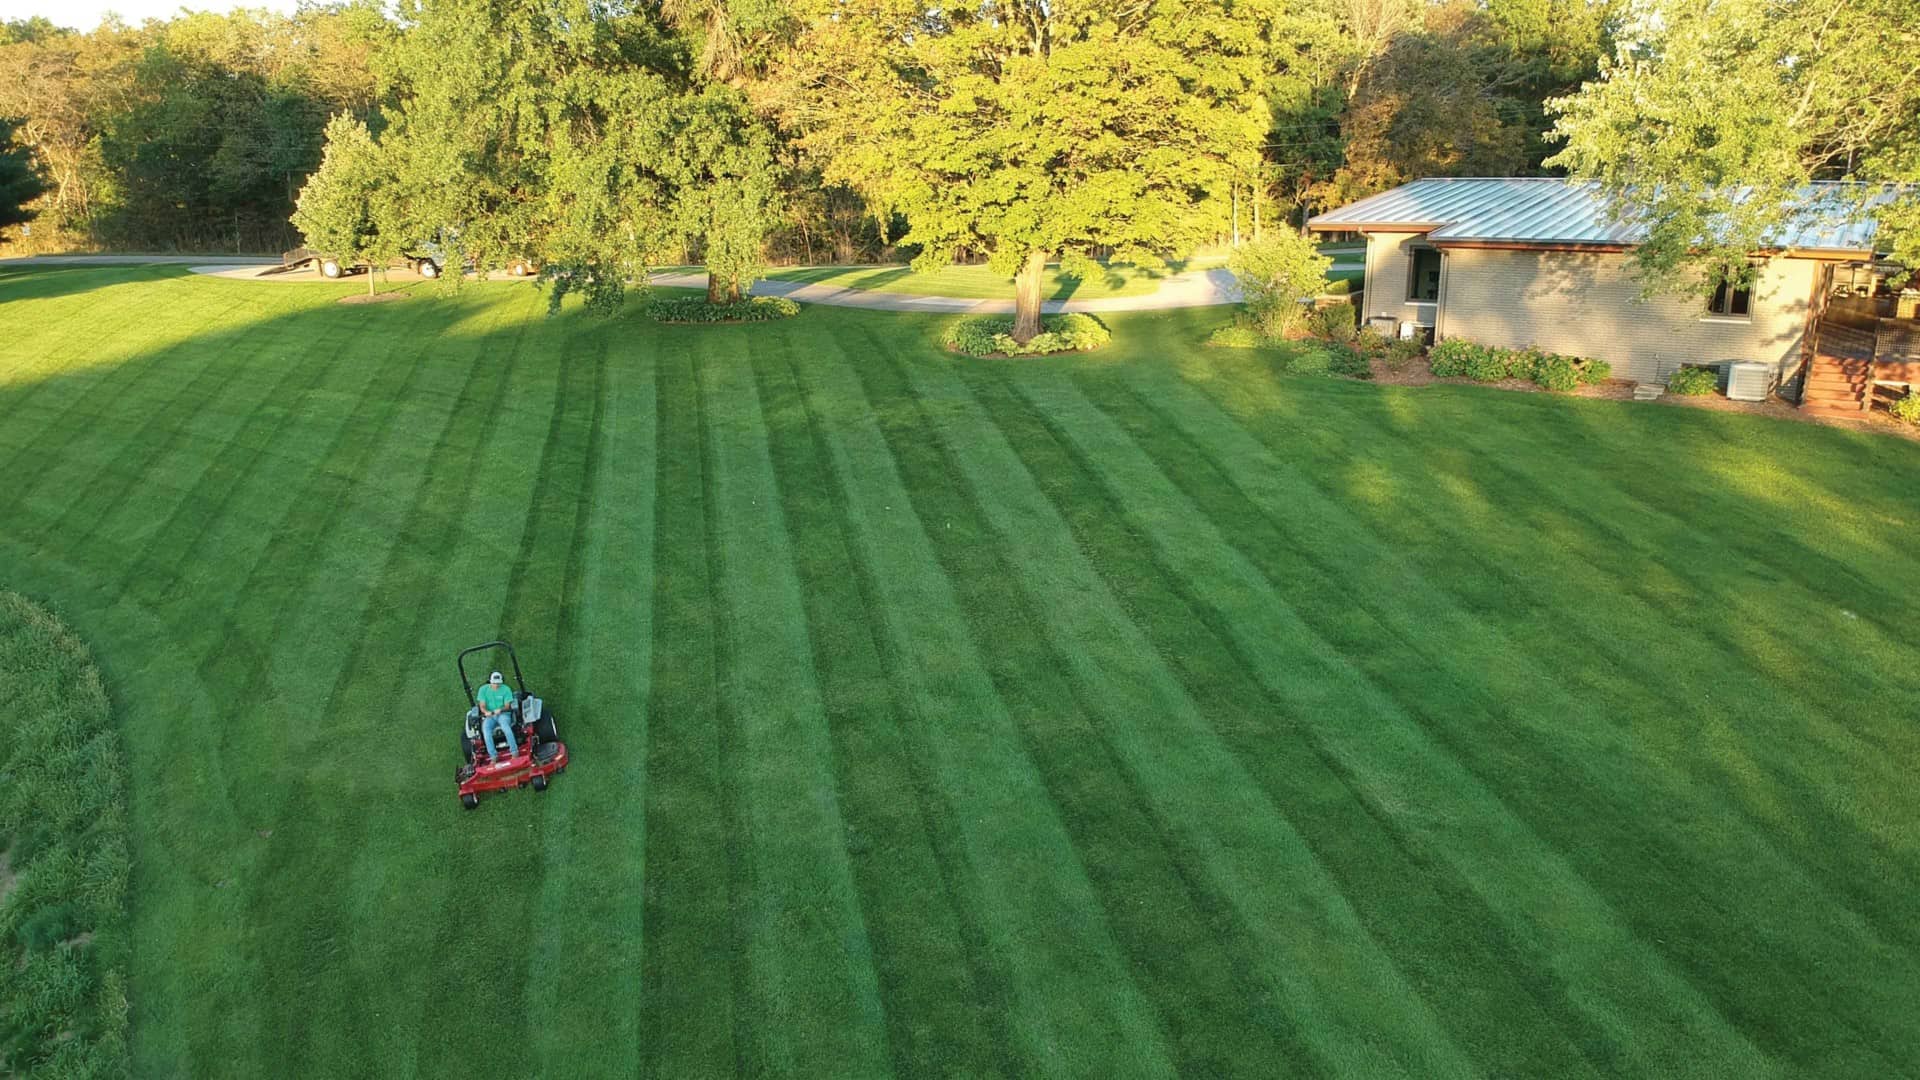 Mow Like a Pro this summer